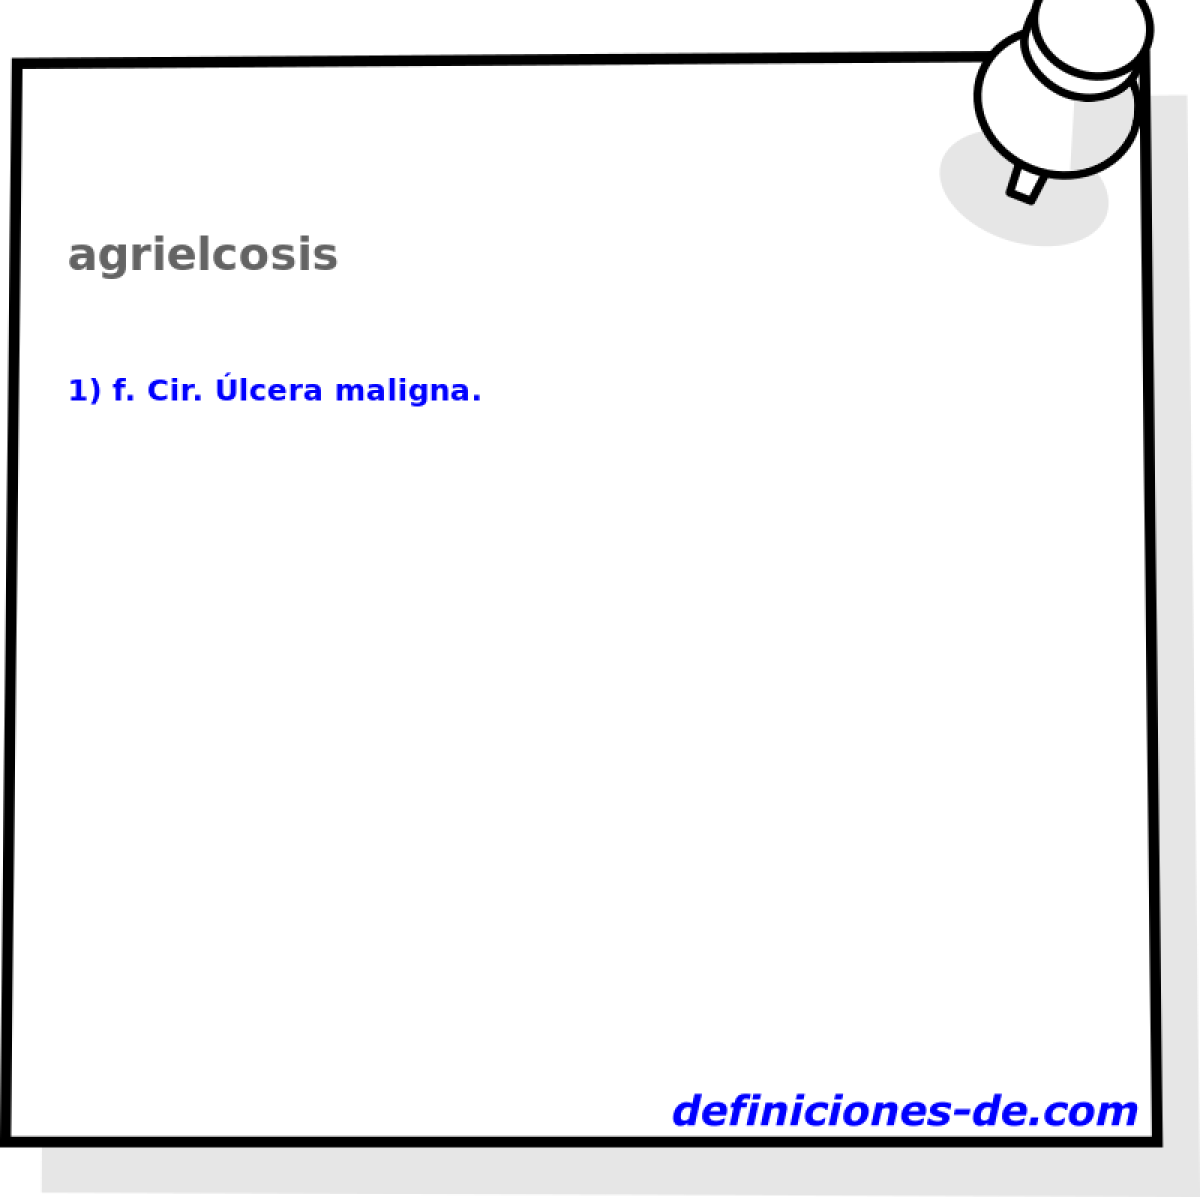 agrielcosis 